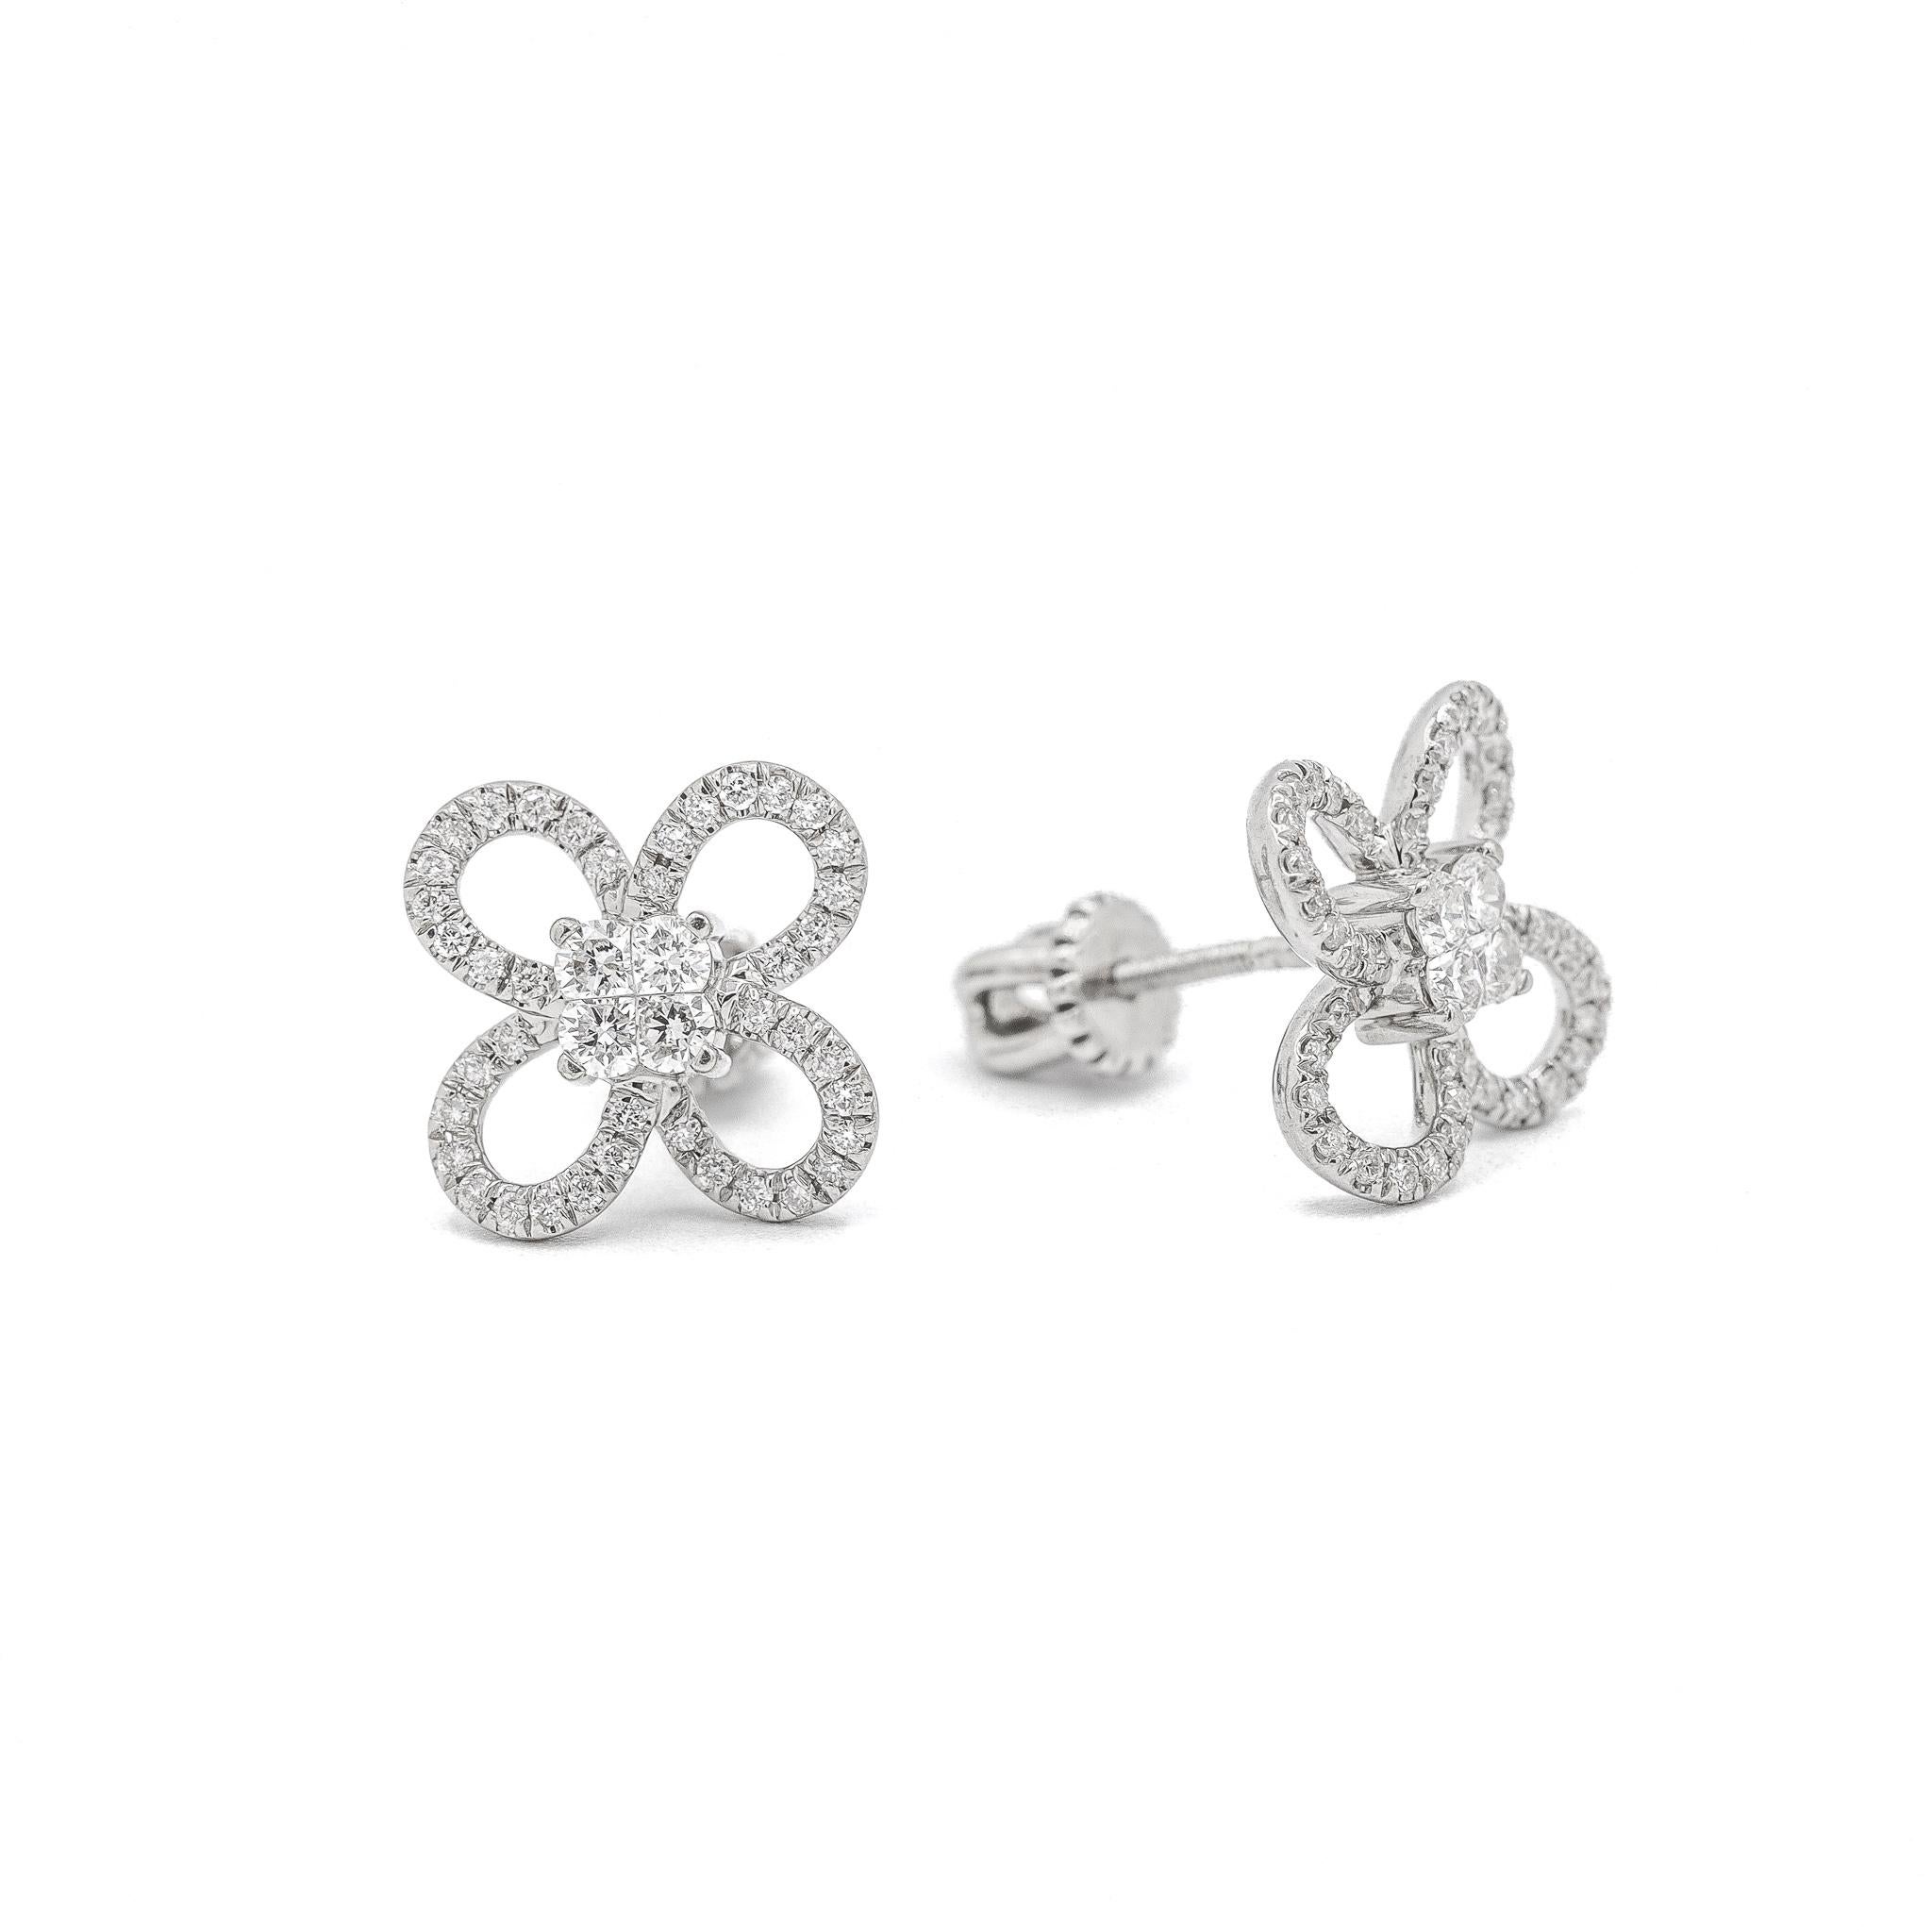 One pair of lady's custom made polished 18K white gold, diamond stud, cluster, halo earrings with screw backs. The earrings measure approximately 0.50 inches in length by 12.18mm tapering to 8.22mm in width and weigh a total of 4.30 grams. In